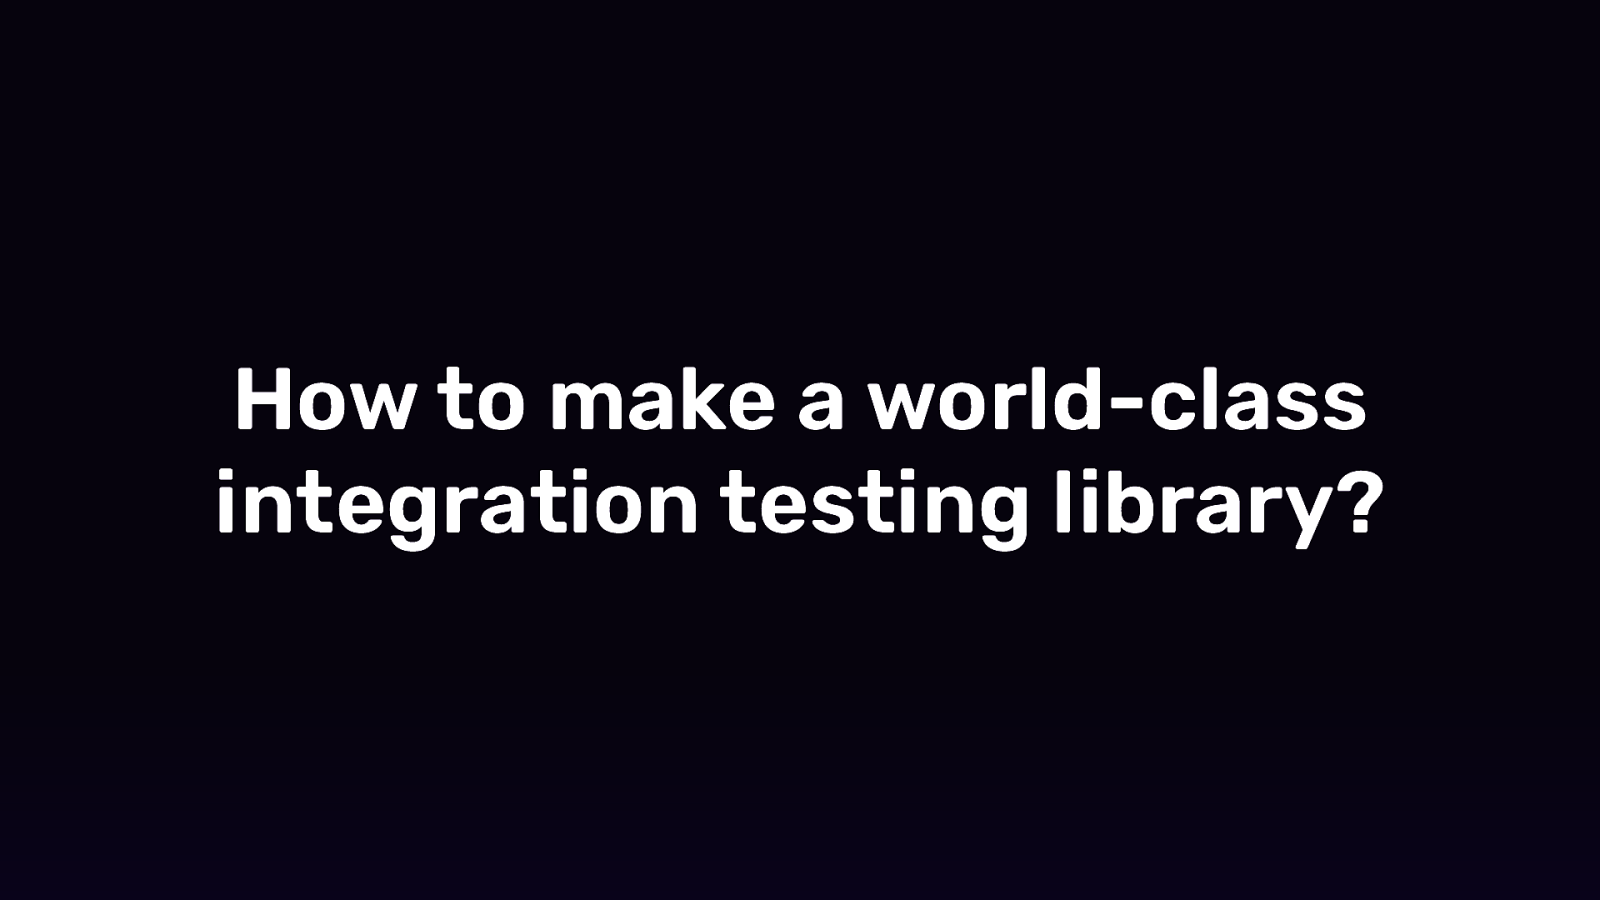 How to make a world-class integration testing library?